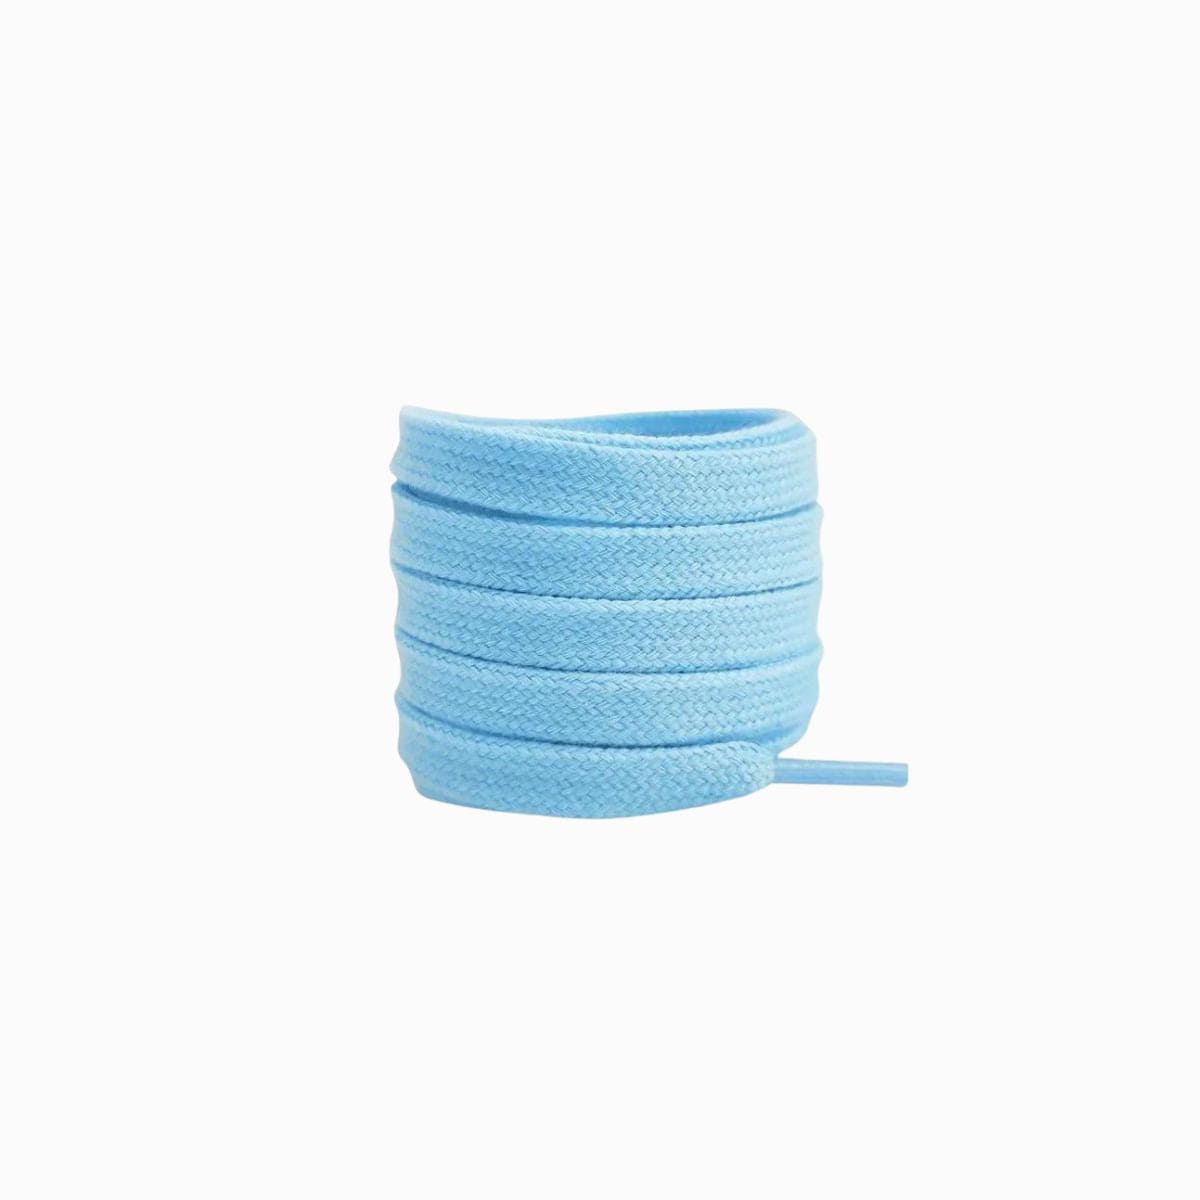 Light Blue Replacement Adidas Shoe Laces for Adidas Gazelle Sneakers by Kicks Shoelaces